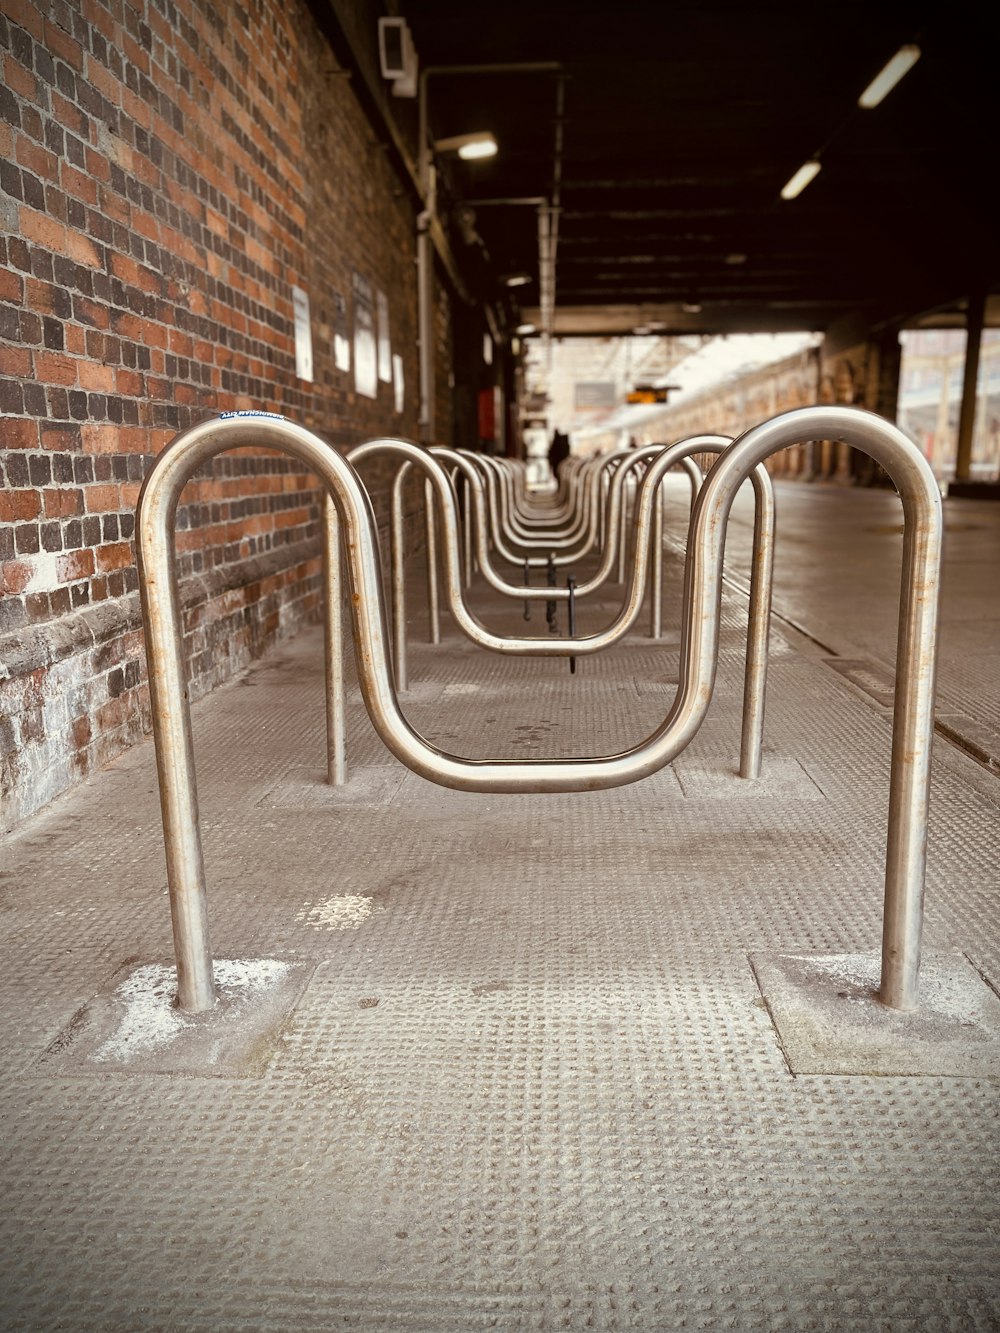 a row of metal bars on a sidewalk next to a brick wall